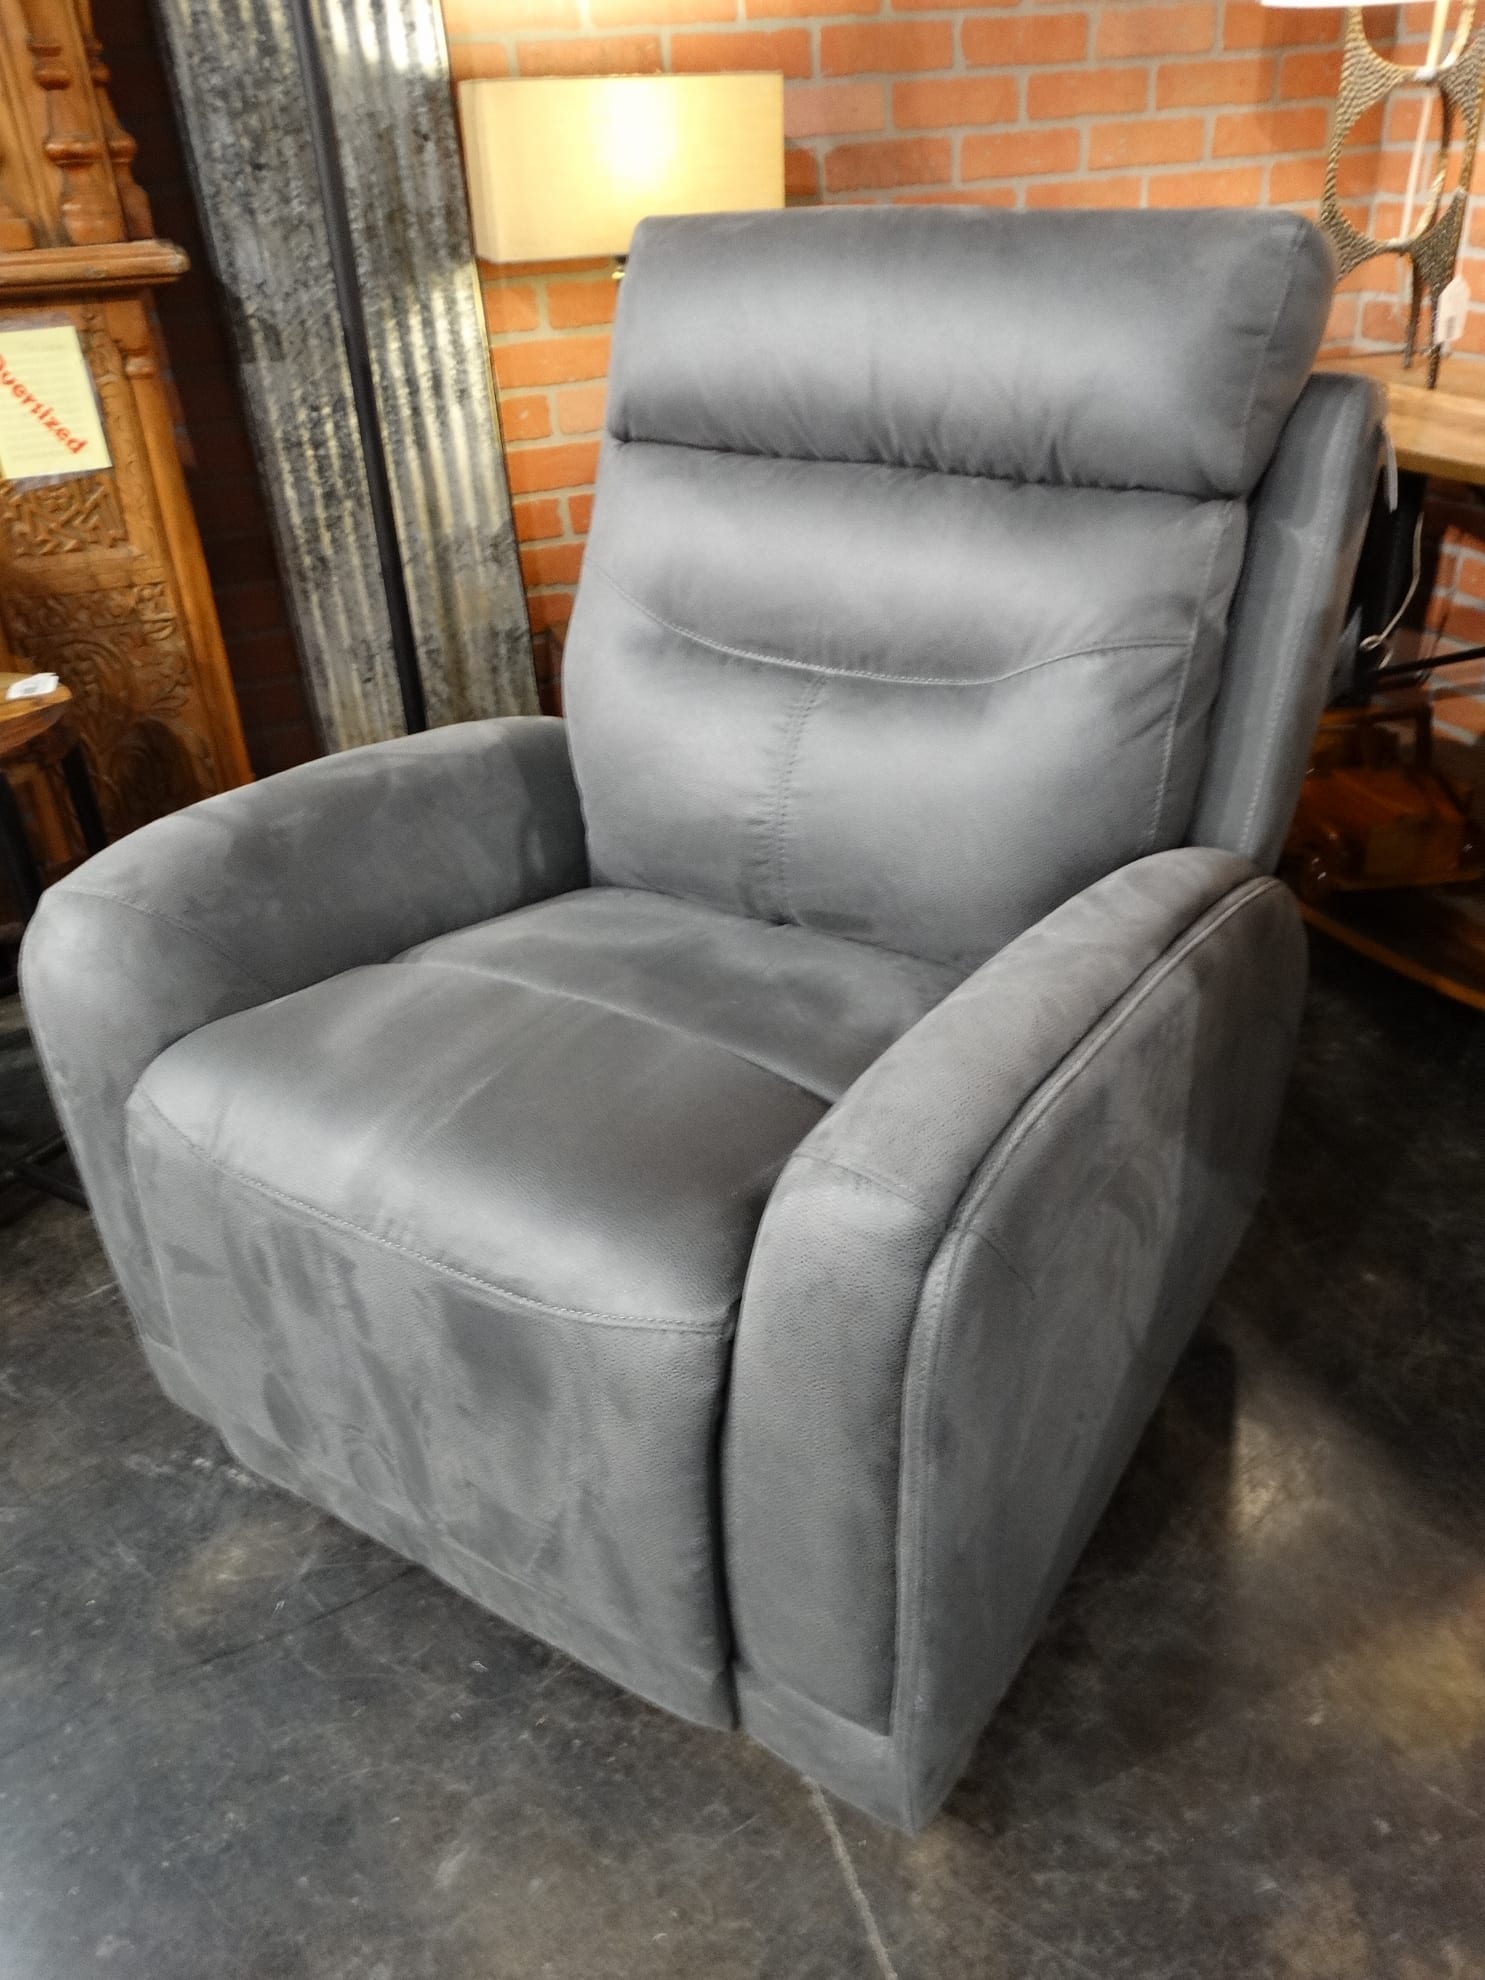 Comfy and Warm Recliner reclines with the push of a button.